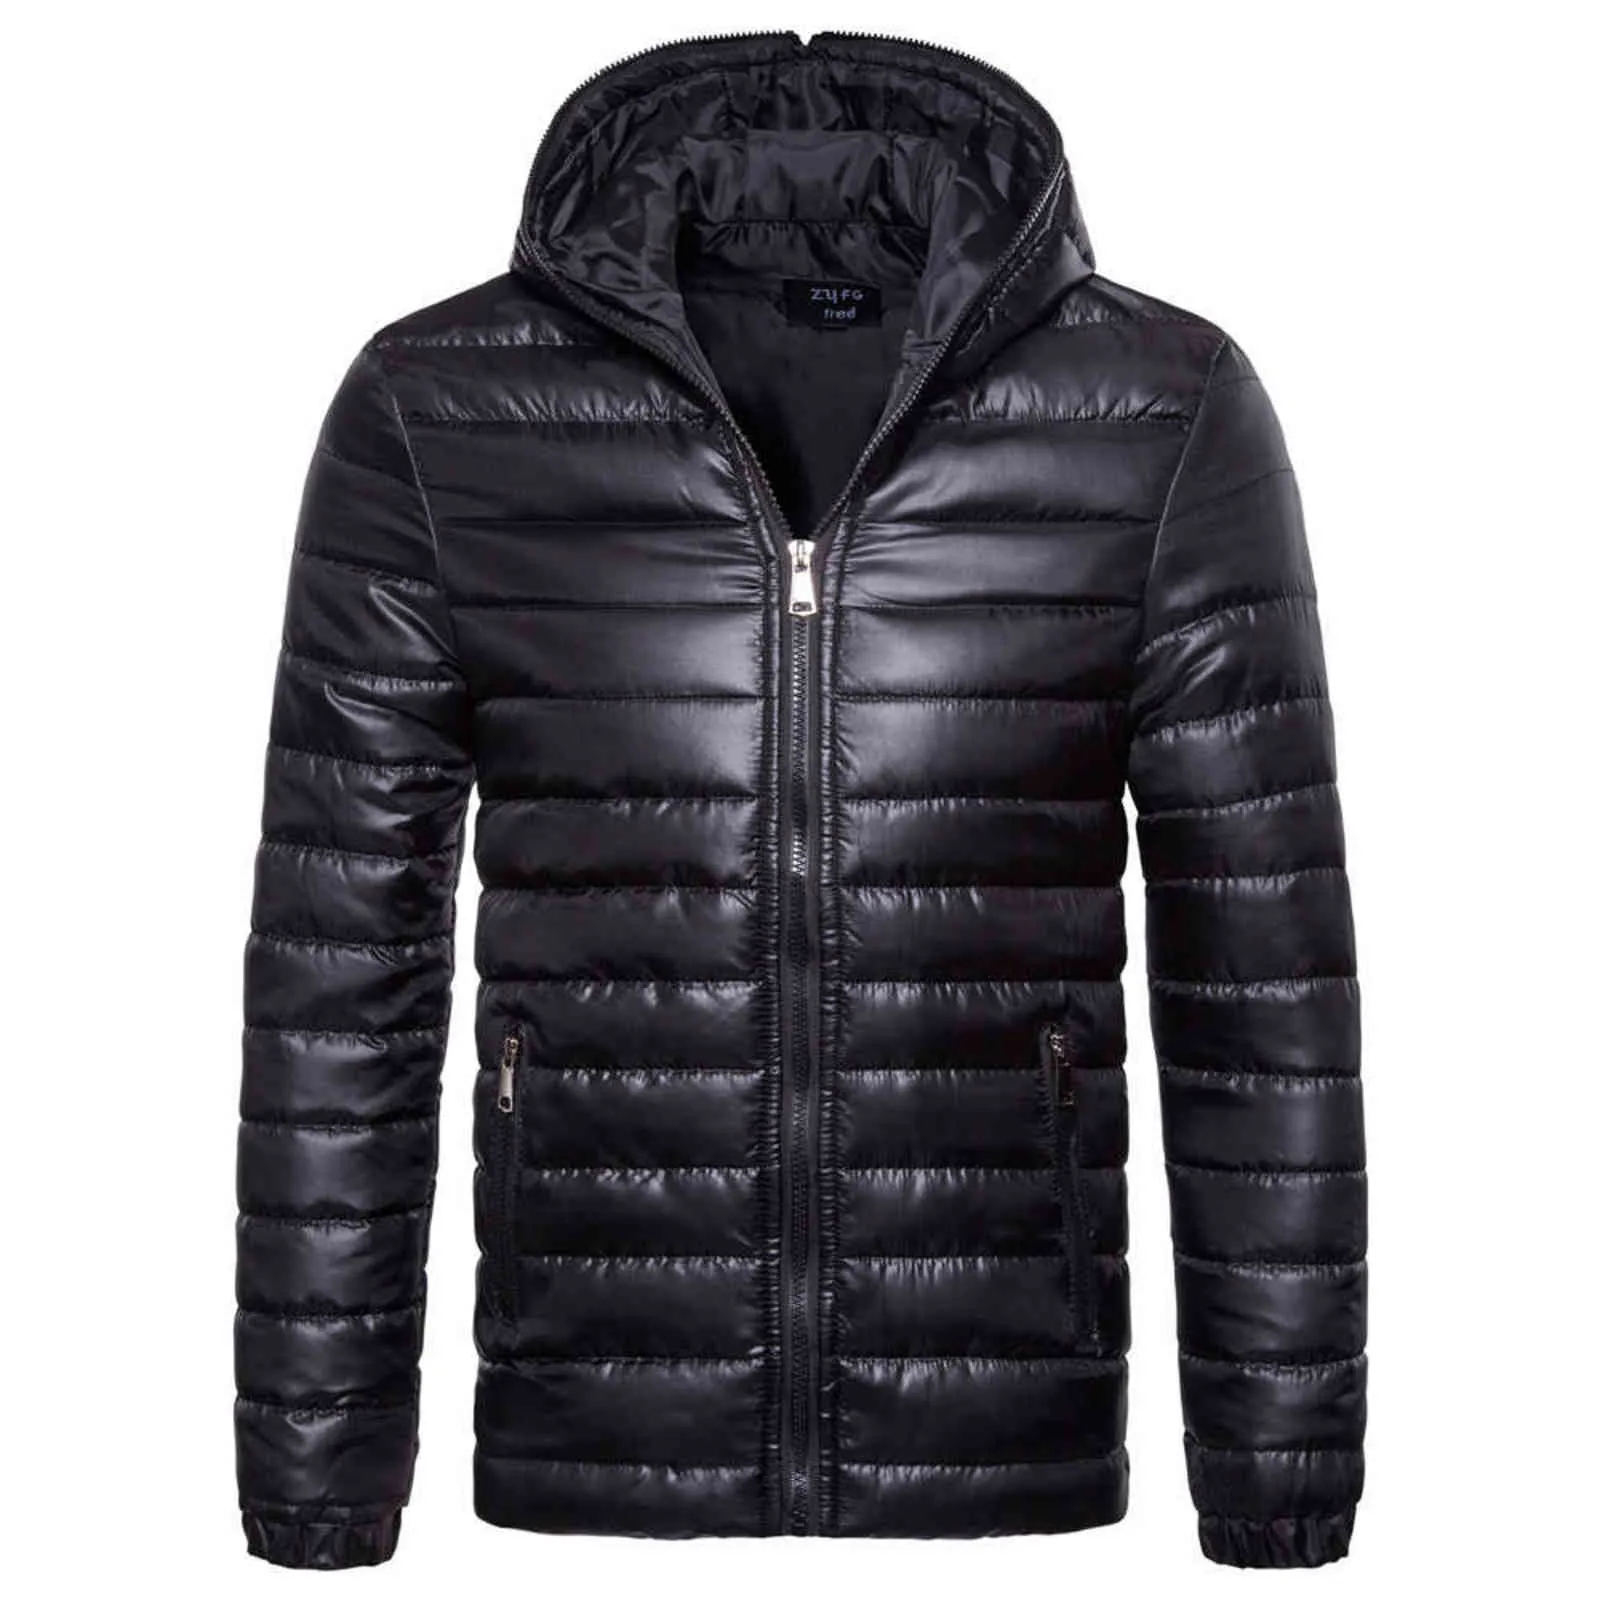 2021 foreign trade autumn new style men's cotton-padded jacket hooded cotton-padded jacket men's cotton-padded jacket dow G1108